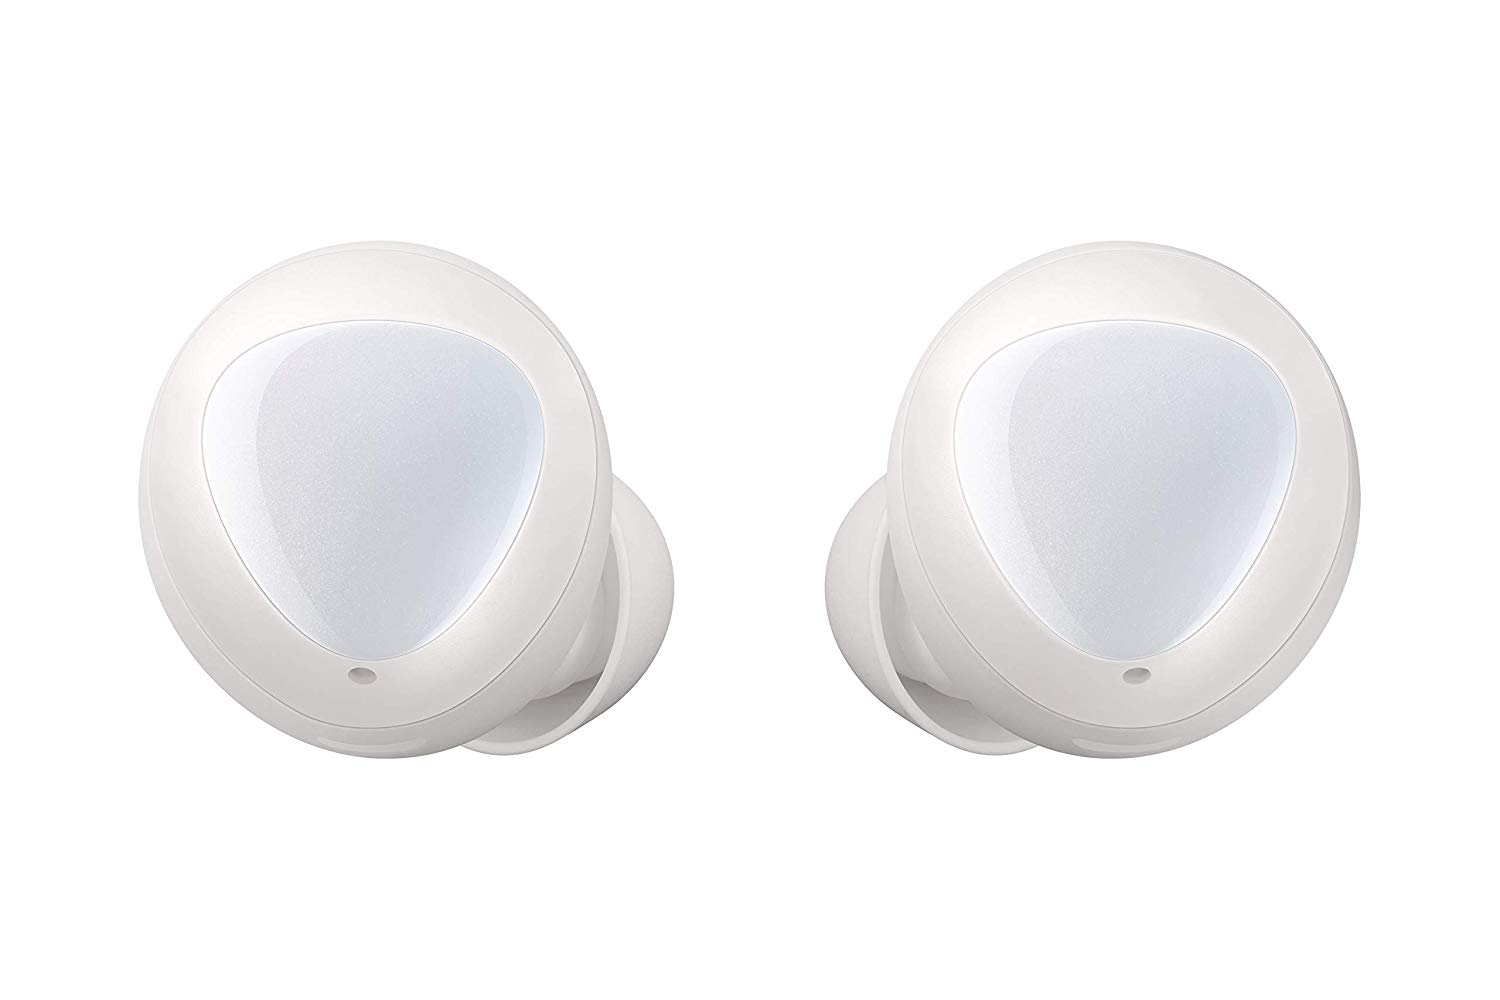 Samsung Galaxy Buds with Charging Case - White